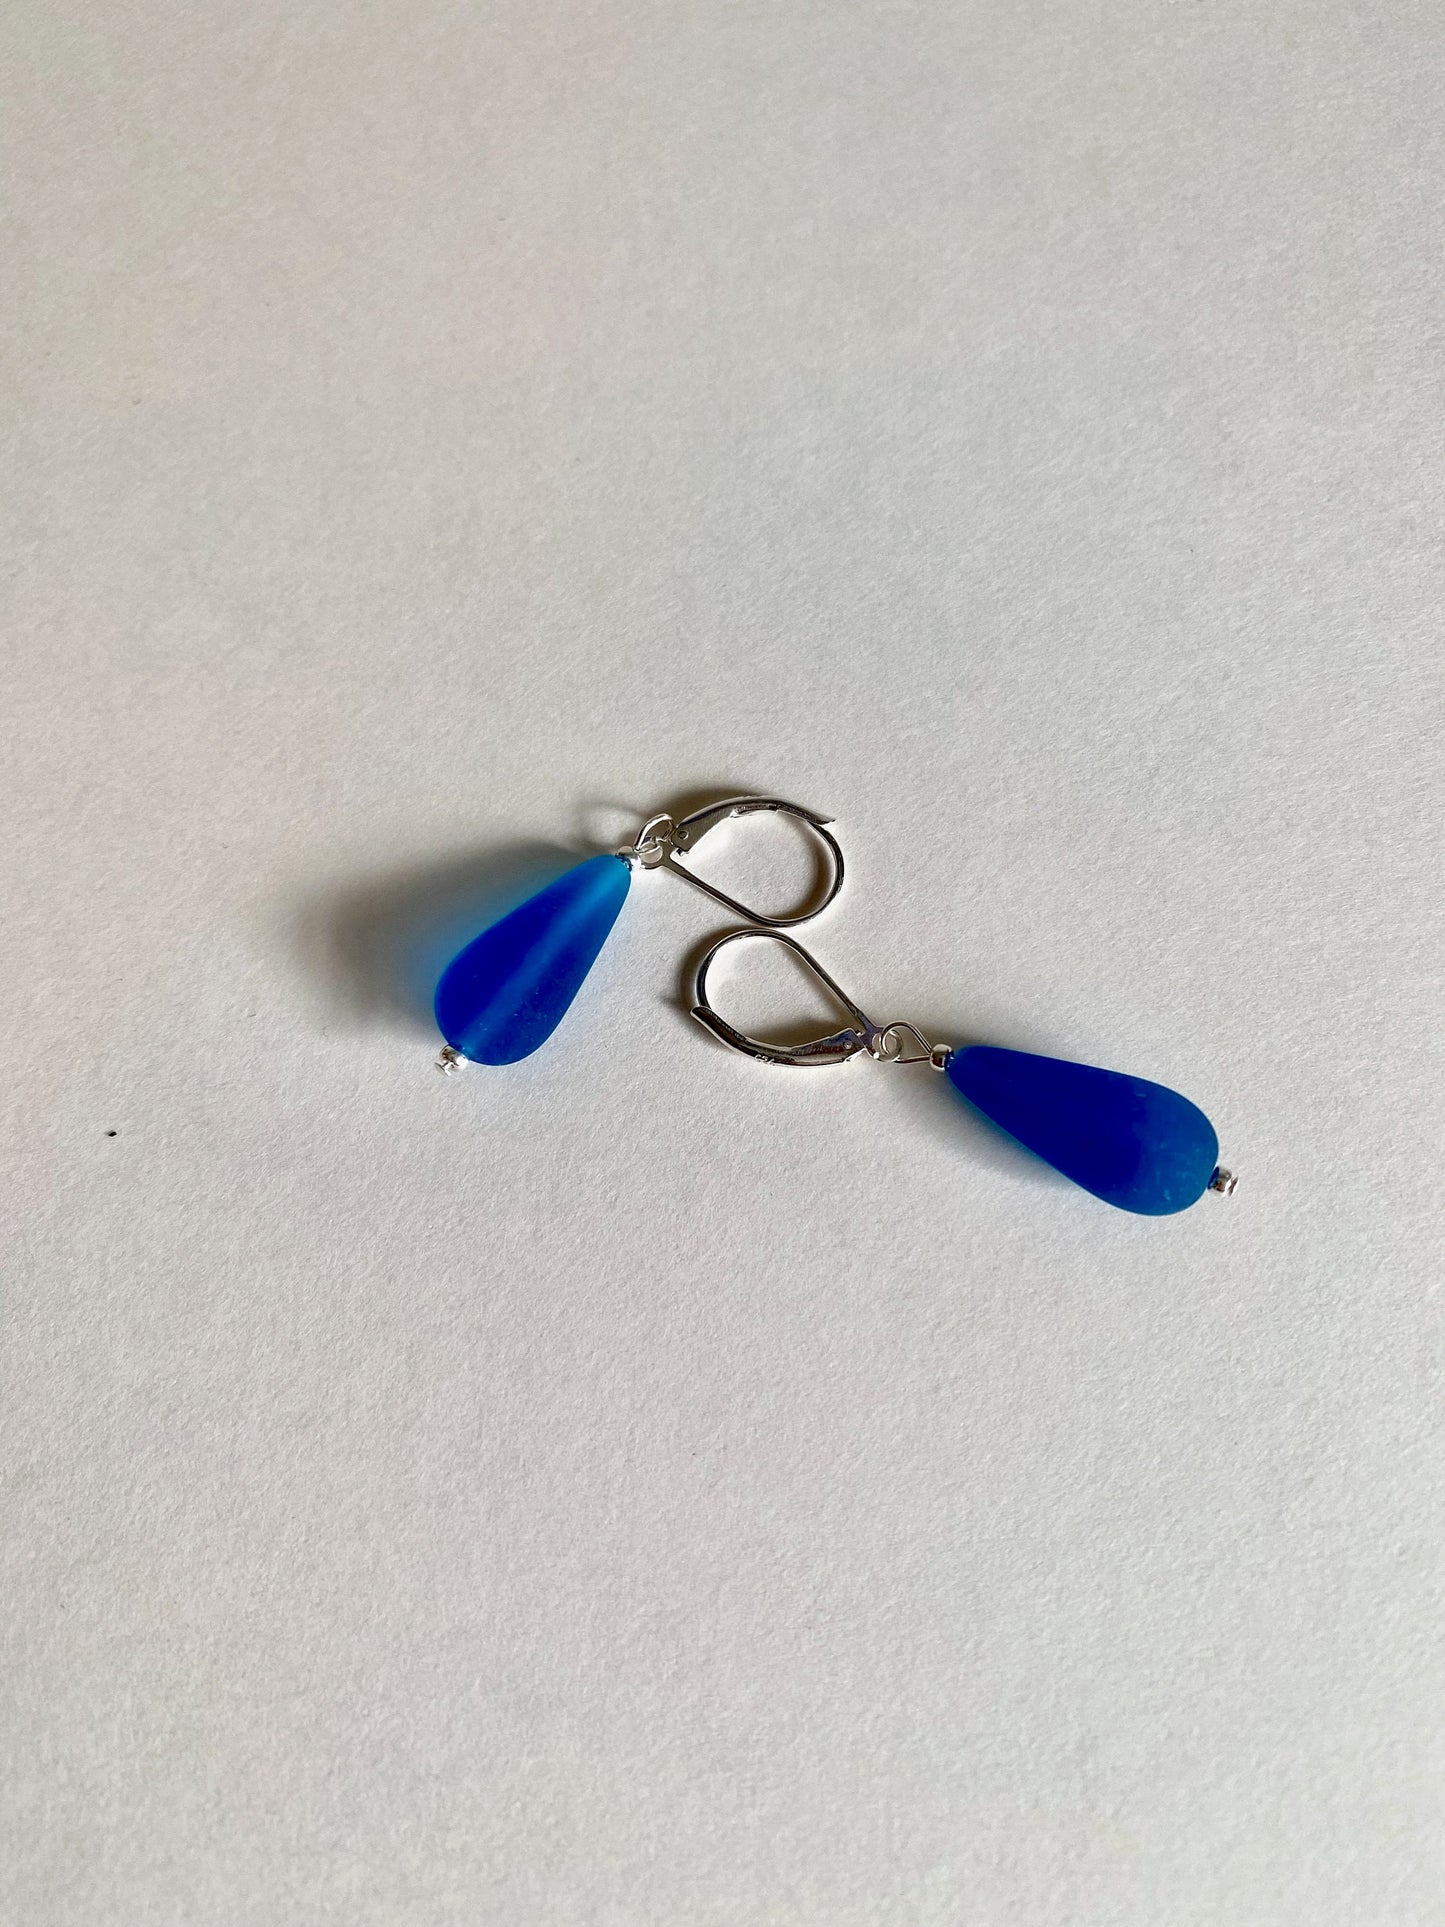 Soft sea glass type frosted capri blue color teardrop earrings. Fashioned with a quality sterling silver lever back clasp.